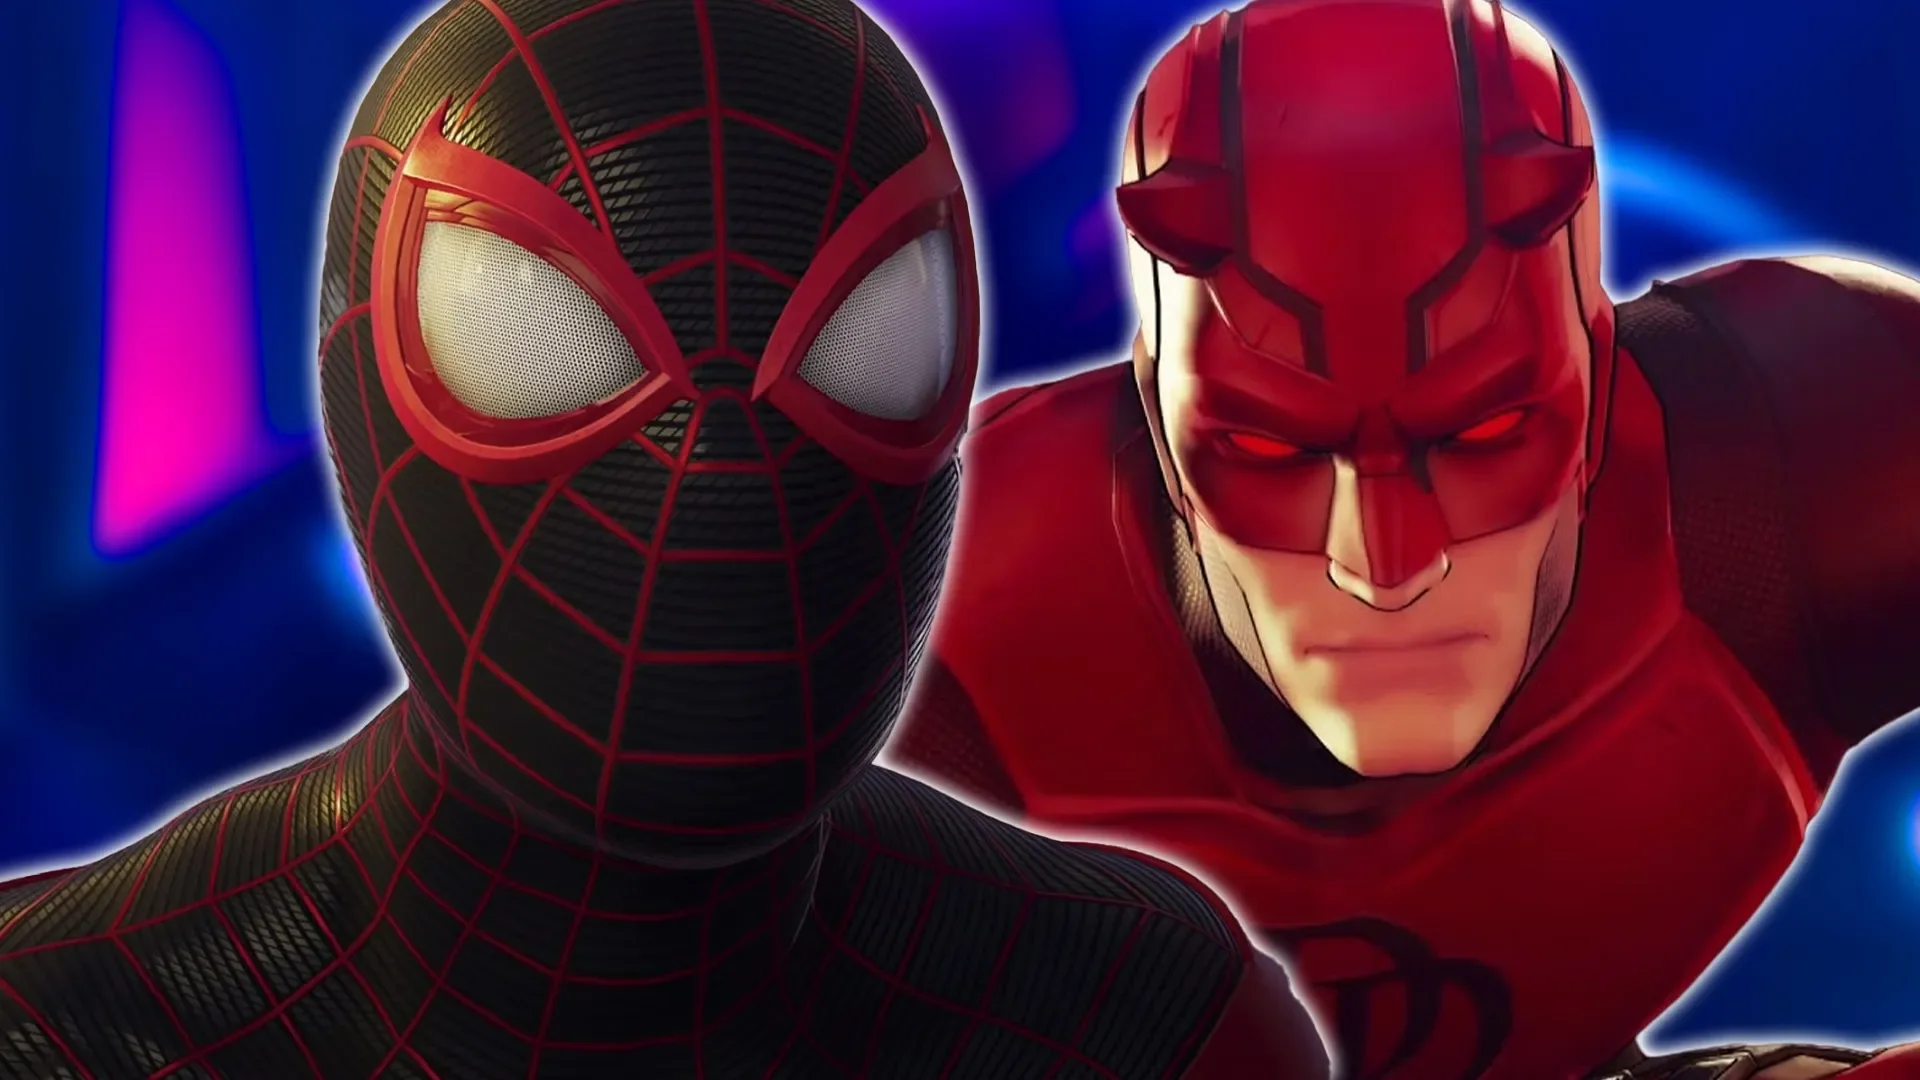 The developers hinted at the appearance of Daredevil in the Marvel's Spider-Man 2 universe